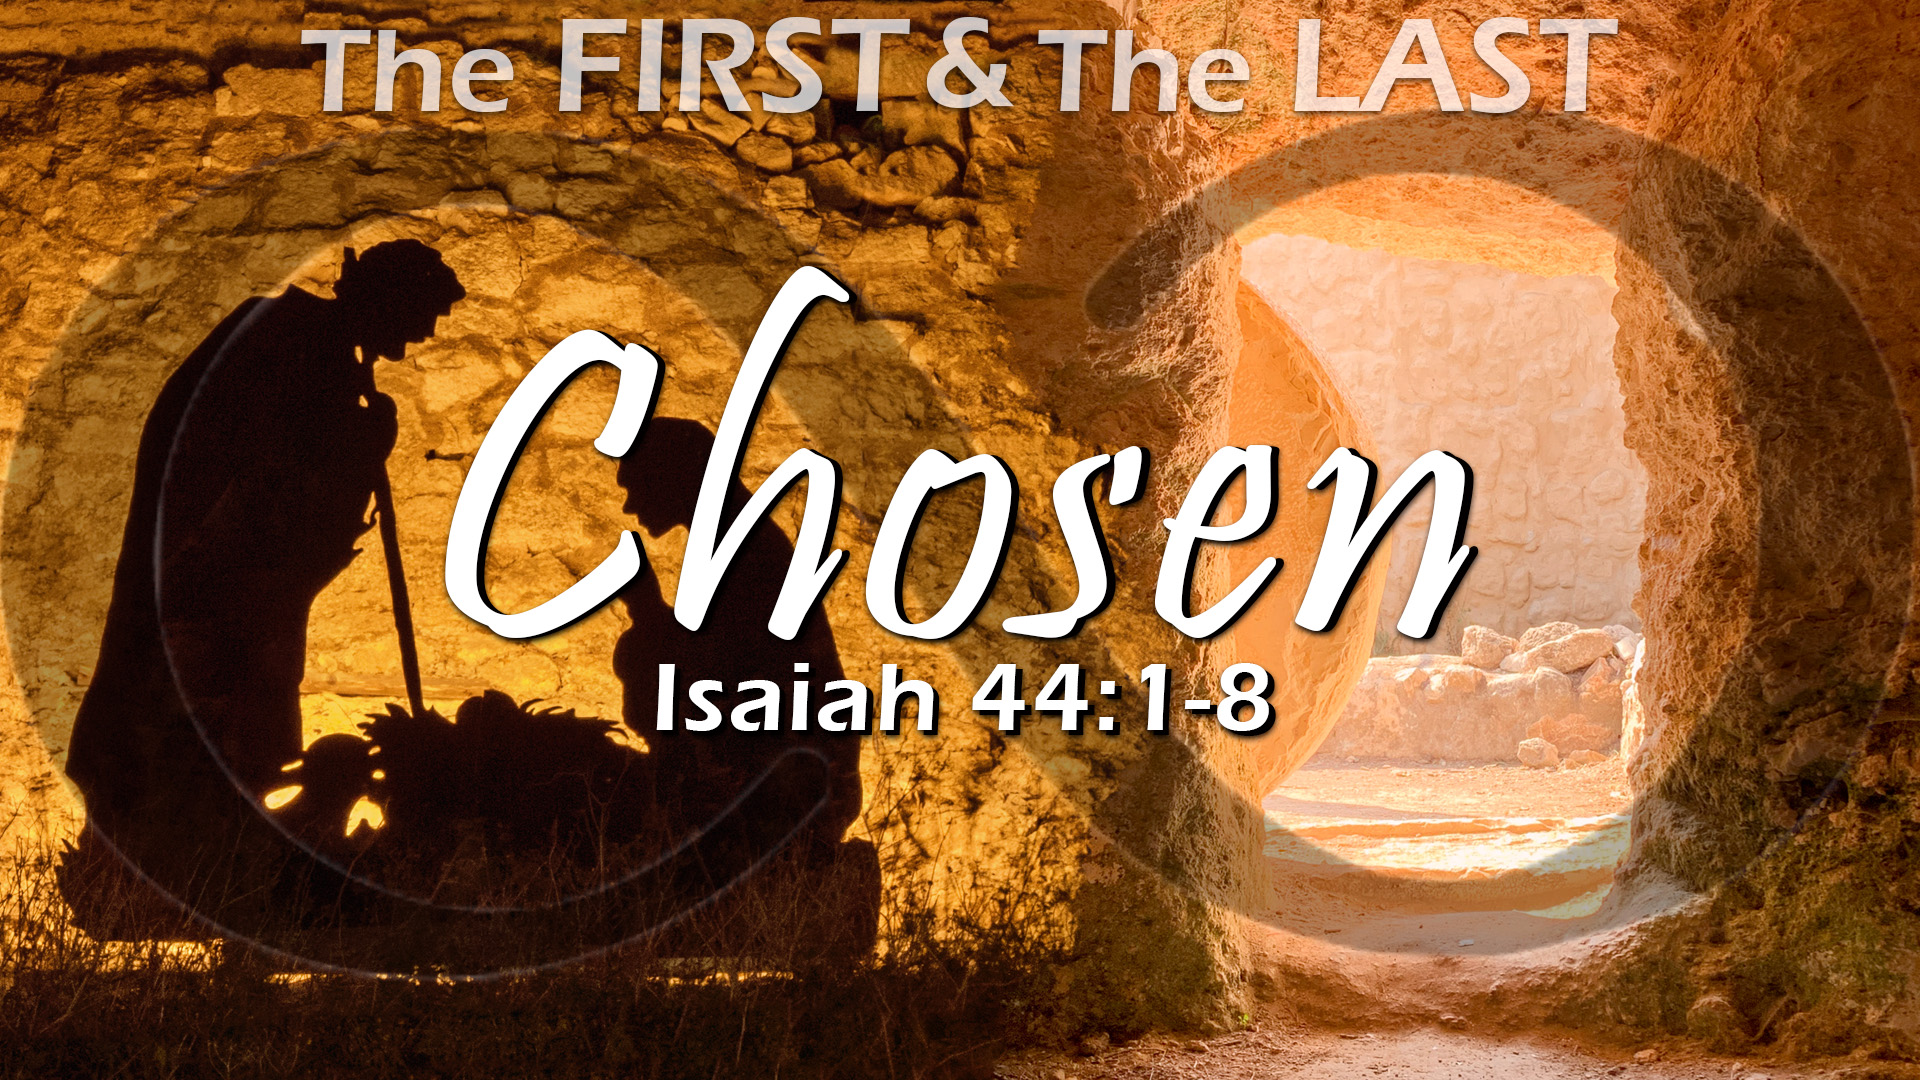 The First And The Last, Part 2: Chosen Image